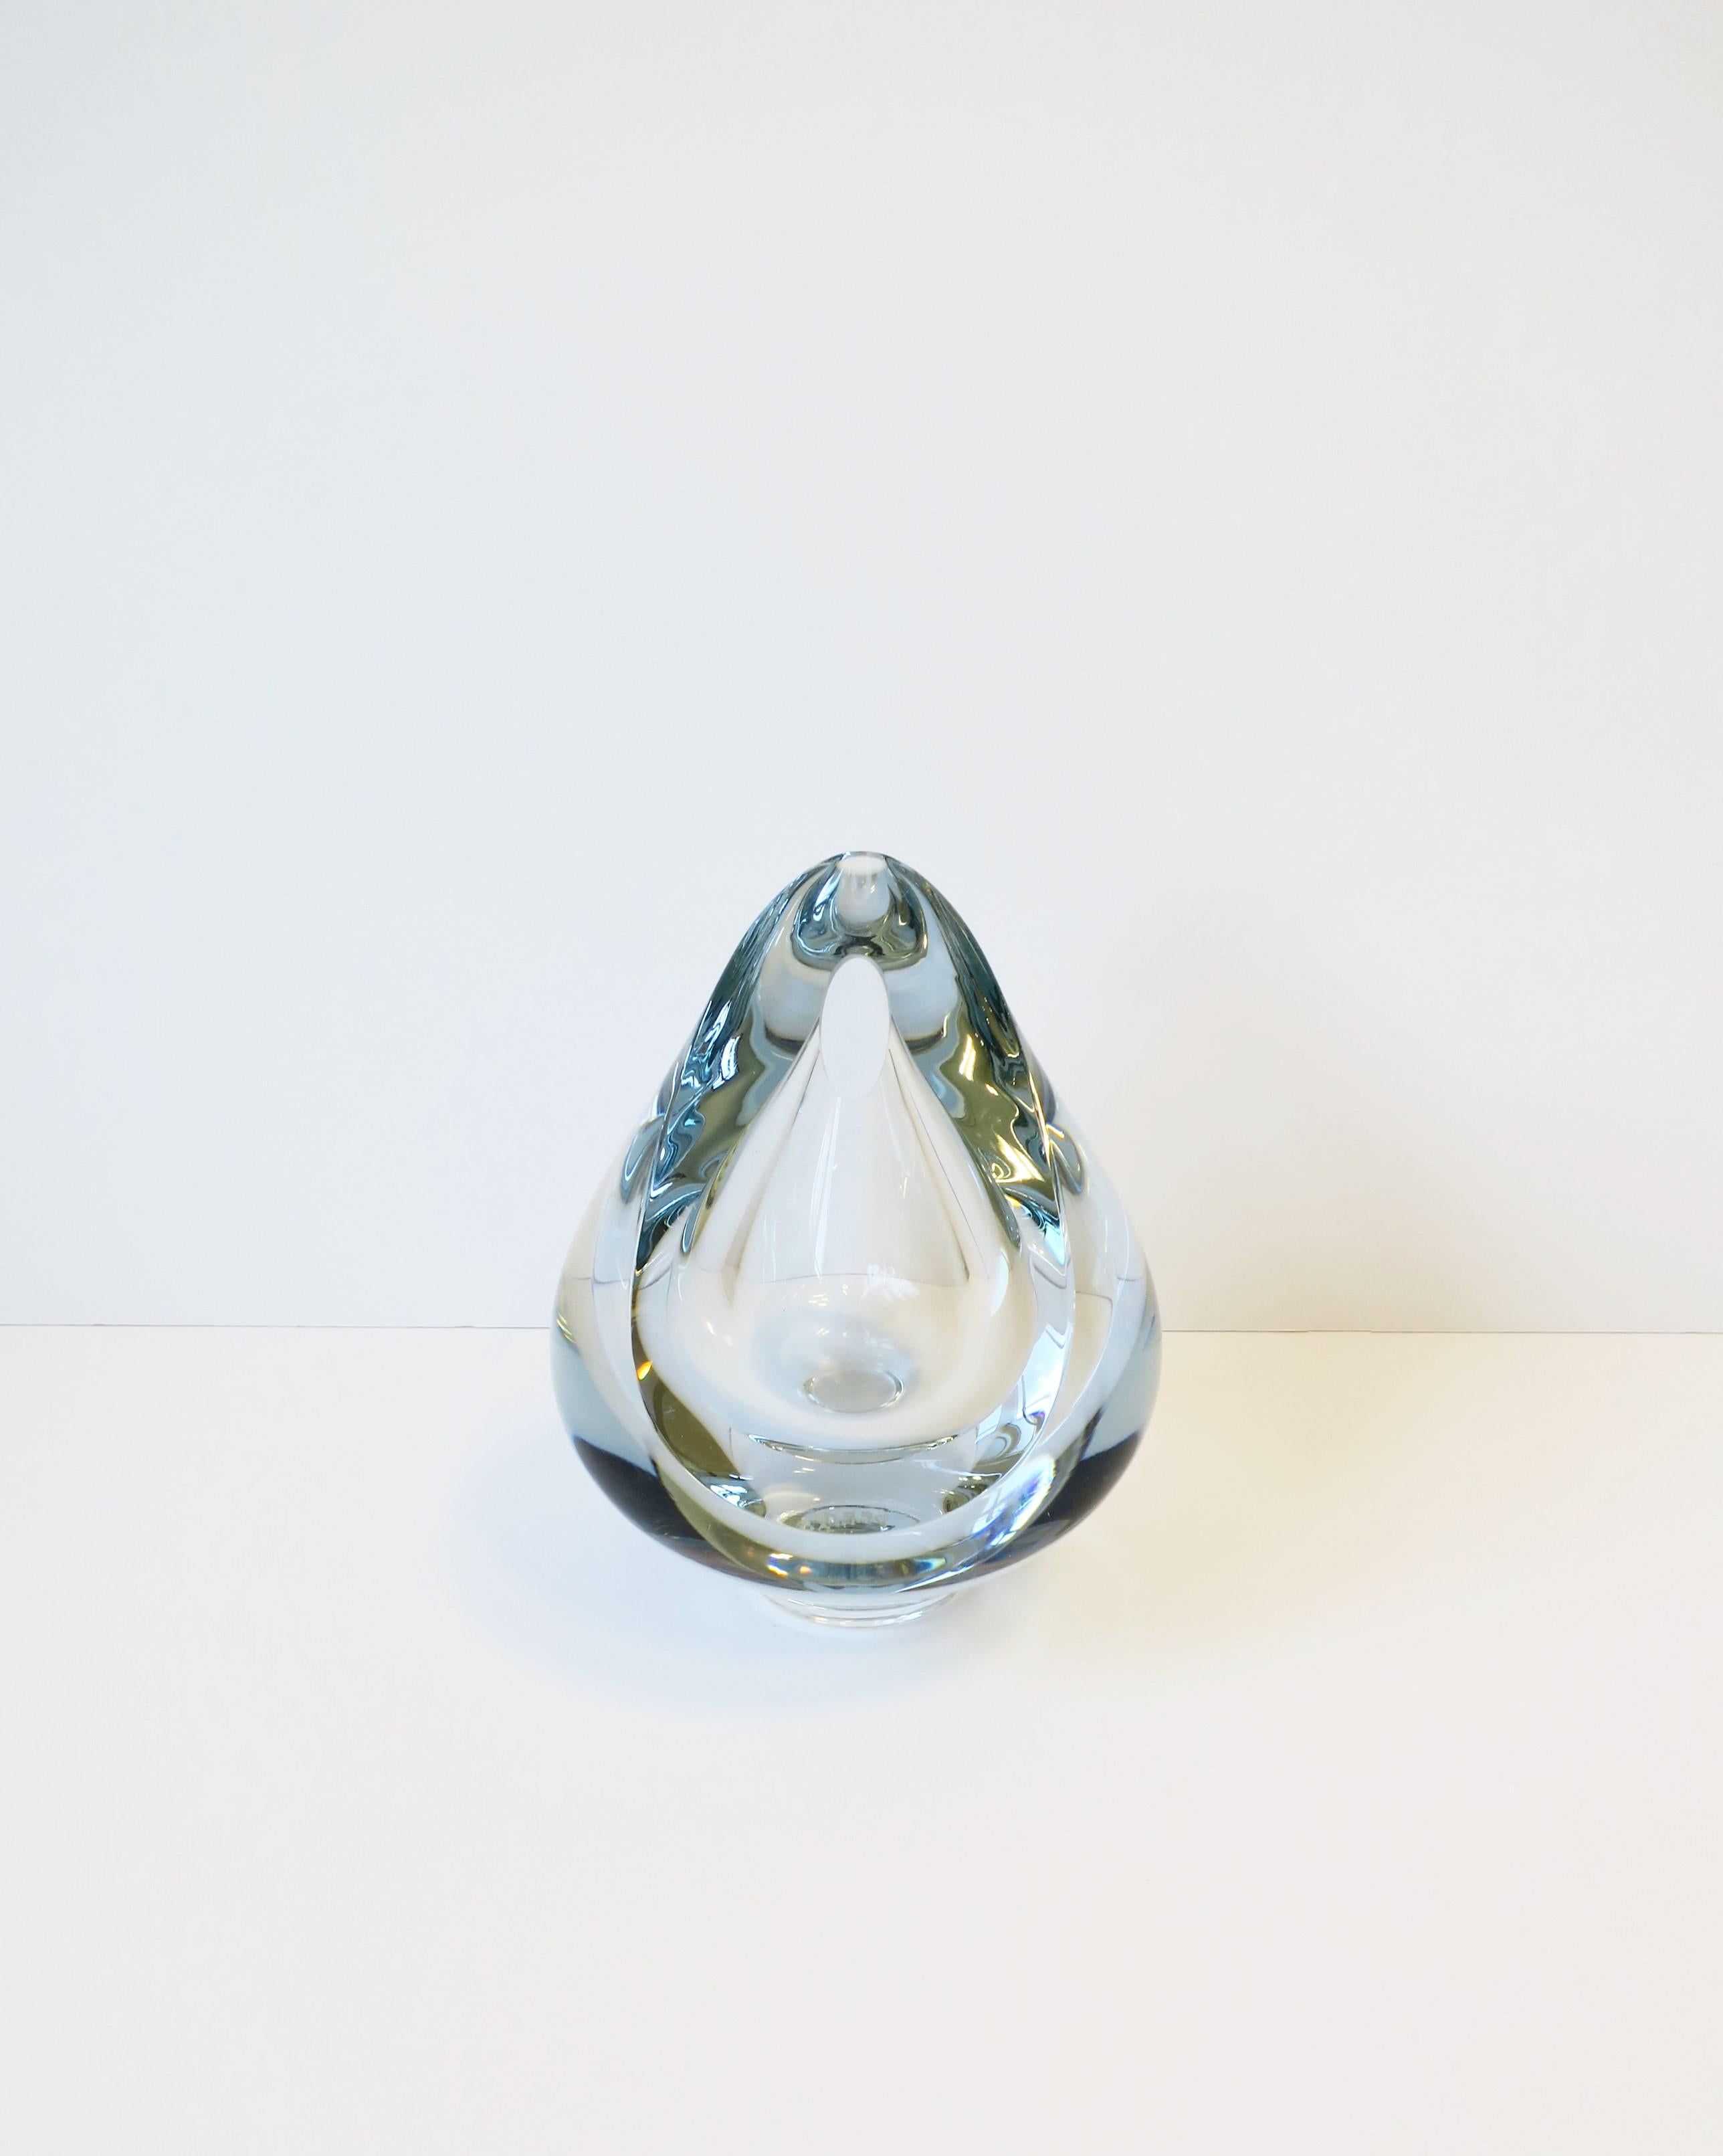 A substantial transparent clear art glass teardrop bud vase or decorative object by artist Robert Deeble, circa late-20th century, USA. Piece is signed on bottom a shown in last image. Very good condition as shown in images. No chips noted.